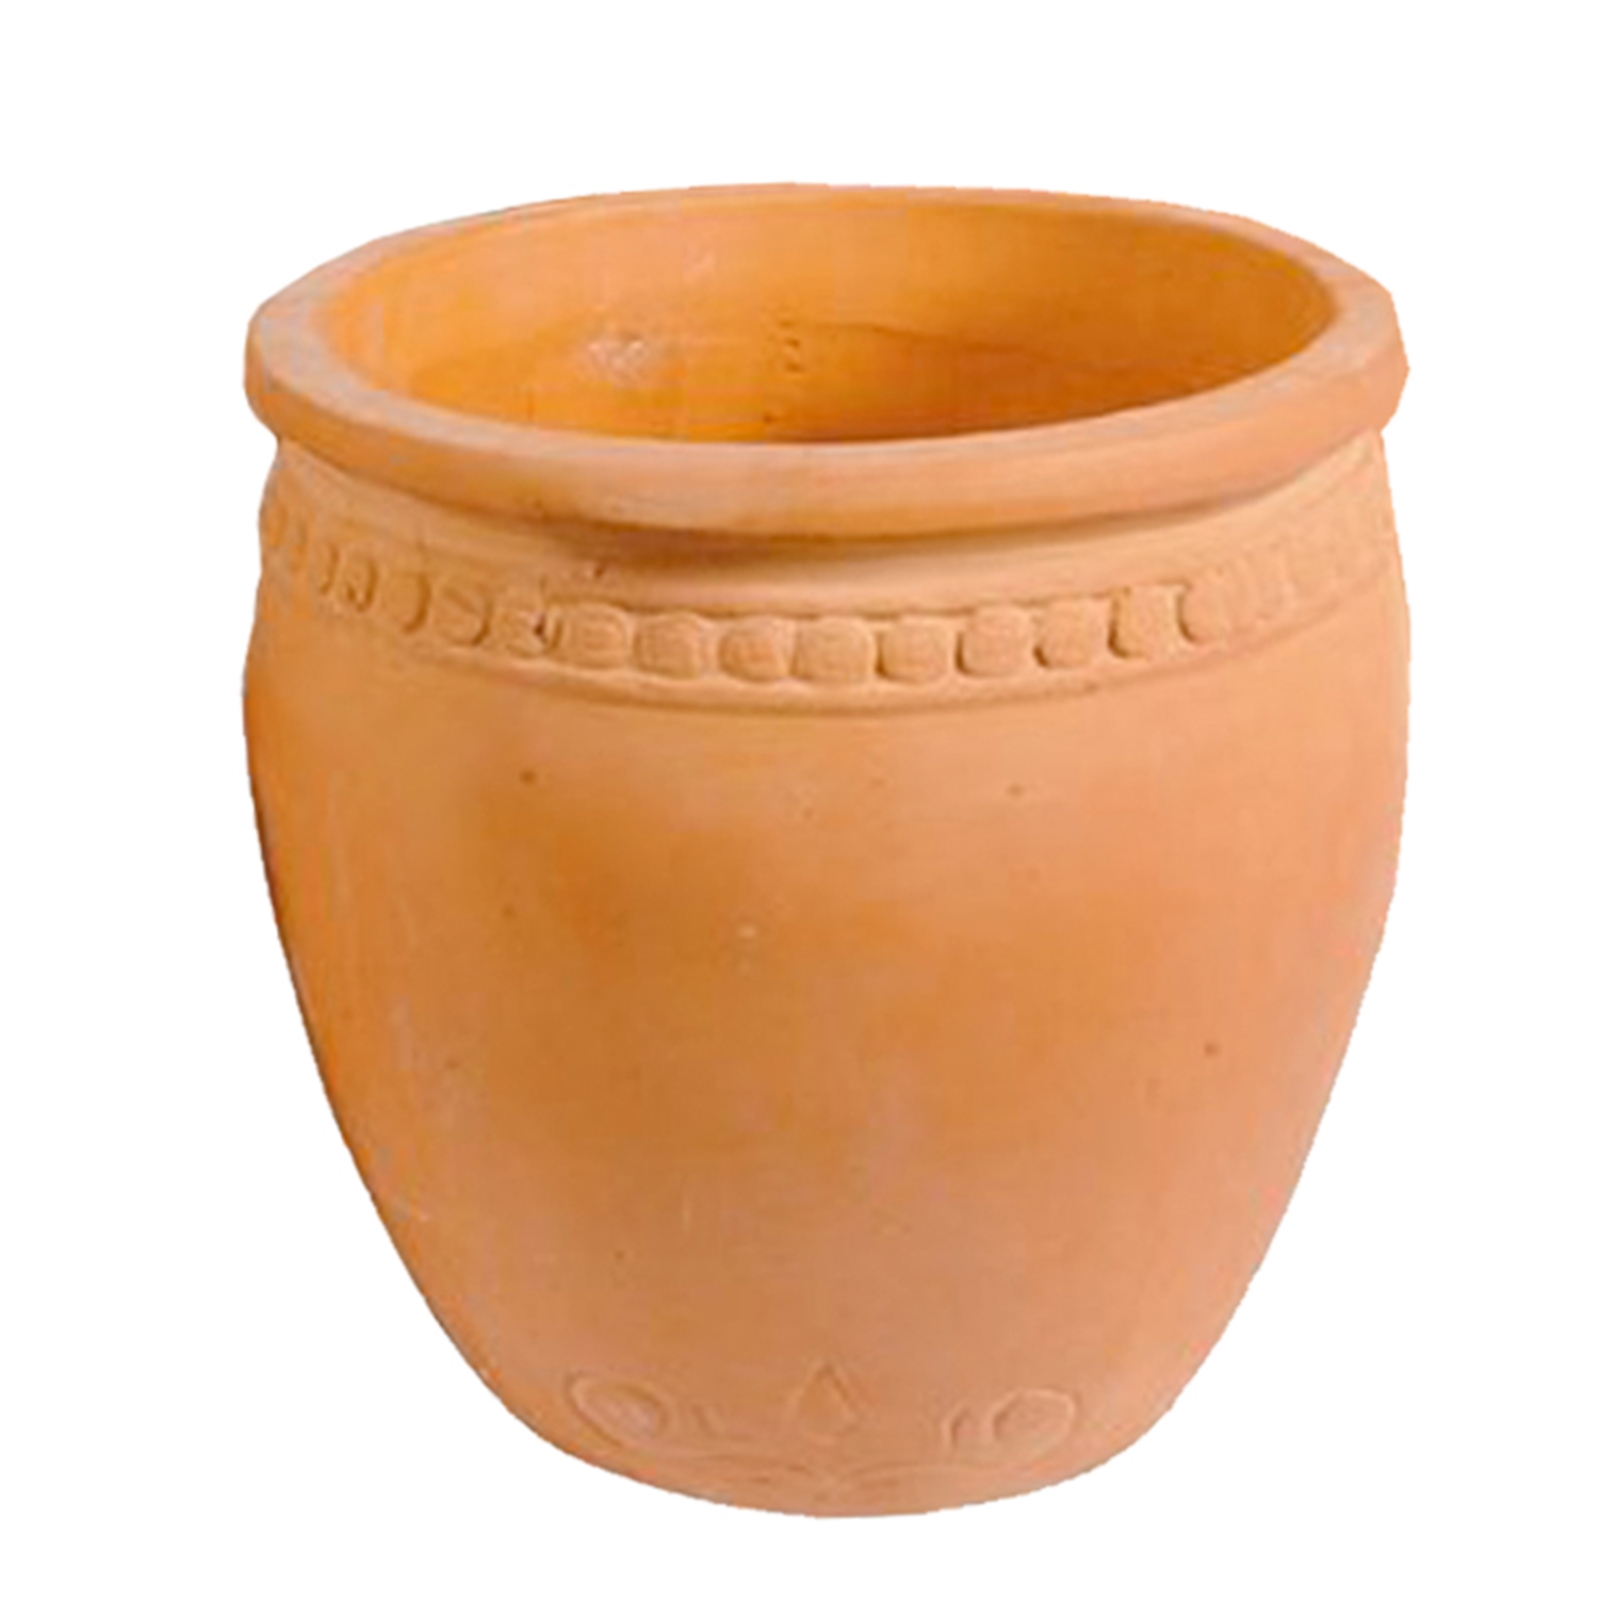 Northcote Pottery 30cm cottaSEAL Terracotta Coin Bowl